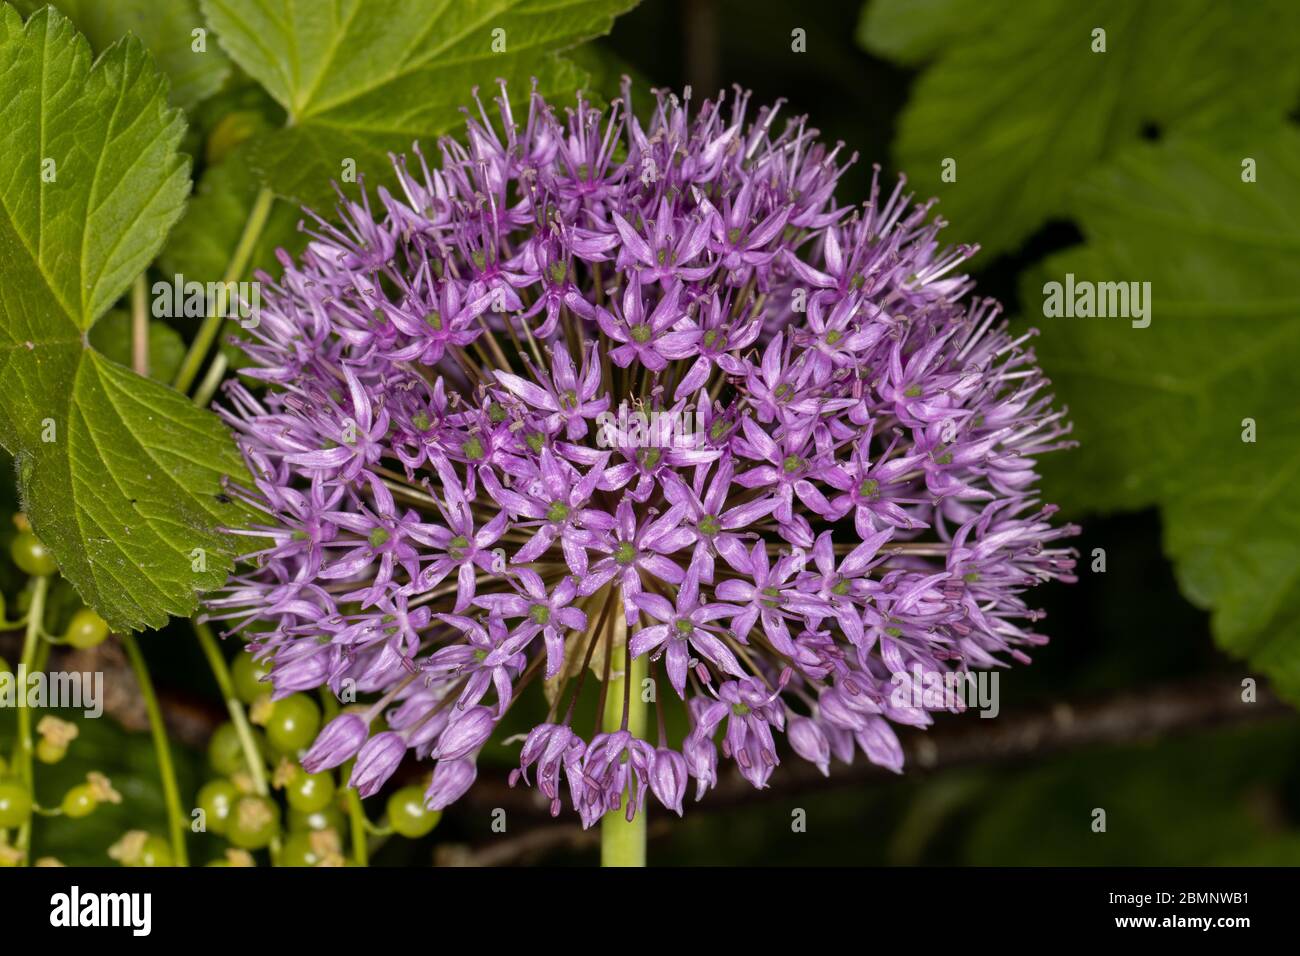 Blooming small purple flowers in vegetable garden Stock Photo